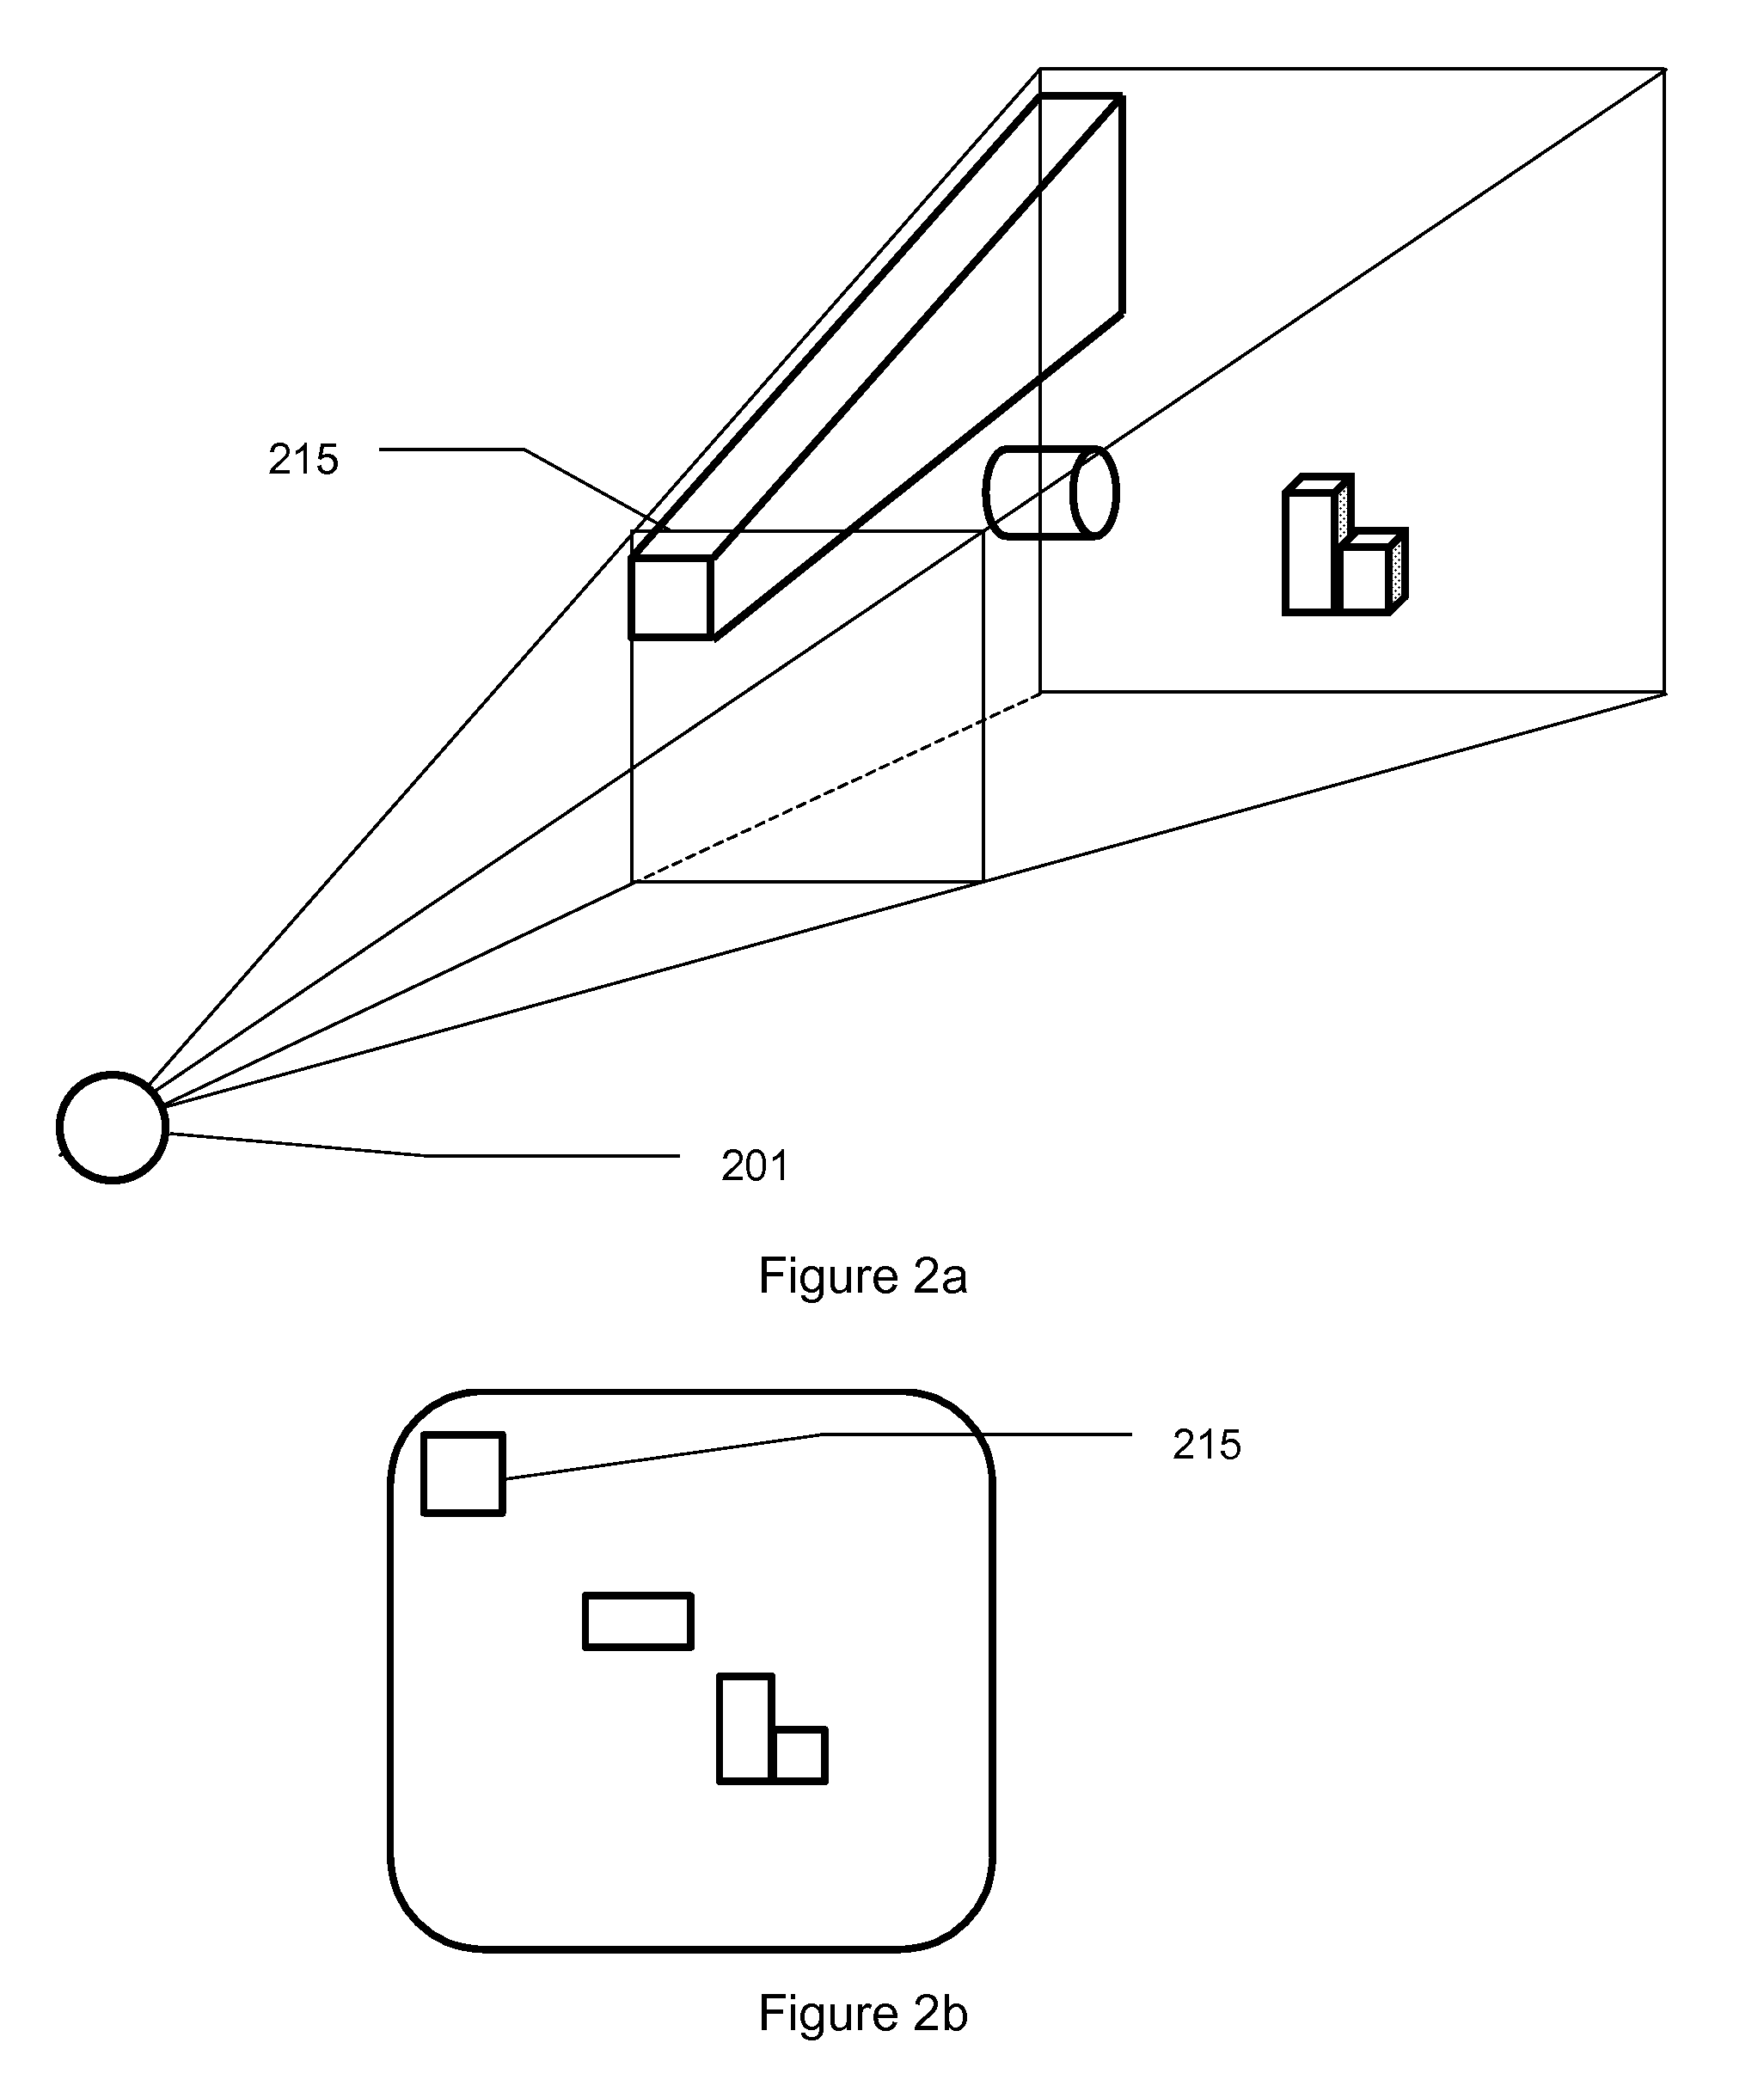 Human-Computer Interface Including Efficient Three-Dimensional Controls